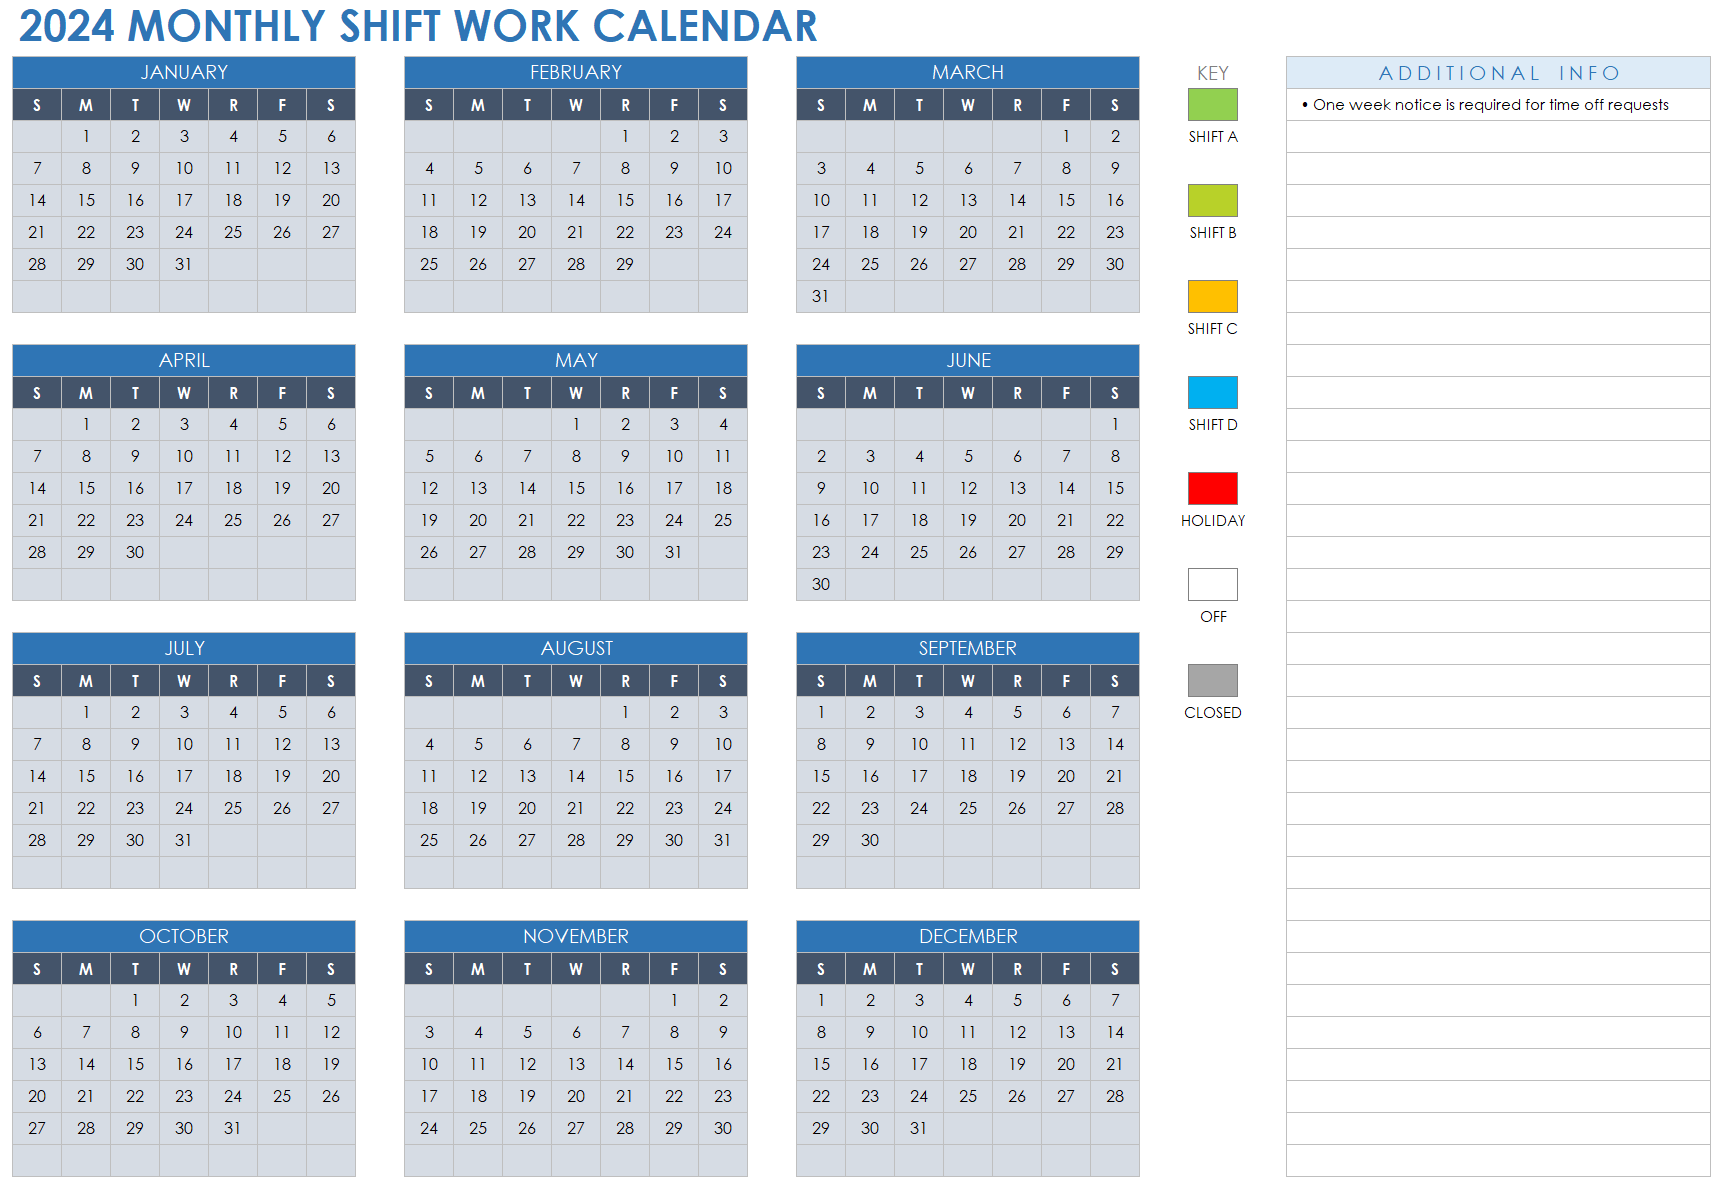 15 Free 2024 Monthly Calendar Templates | Smartsheet intended for Free Printable Calendar 2024 Task By Month